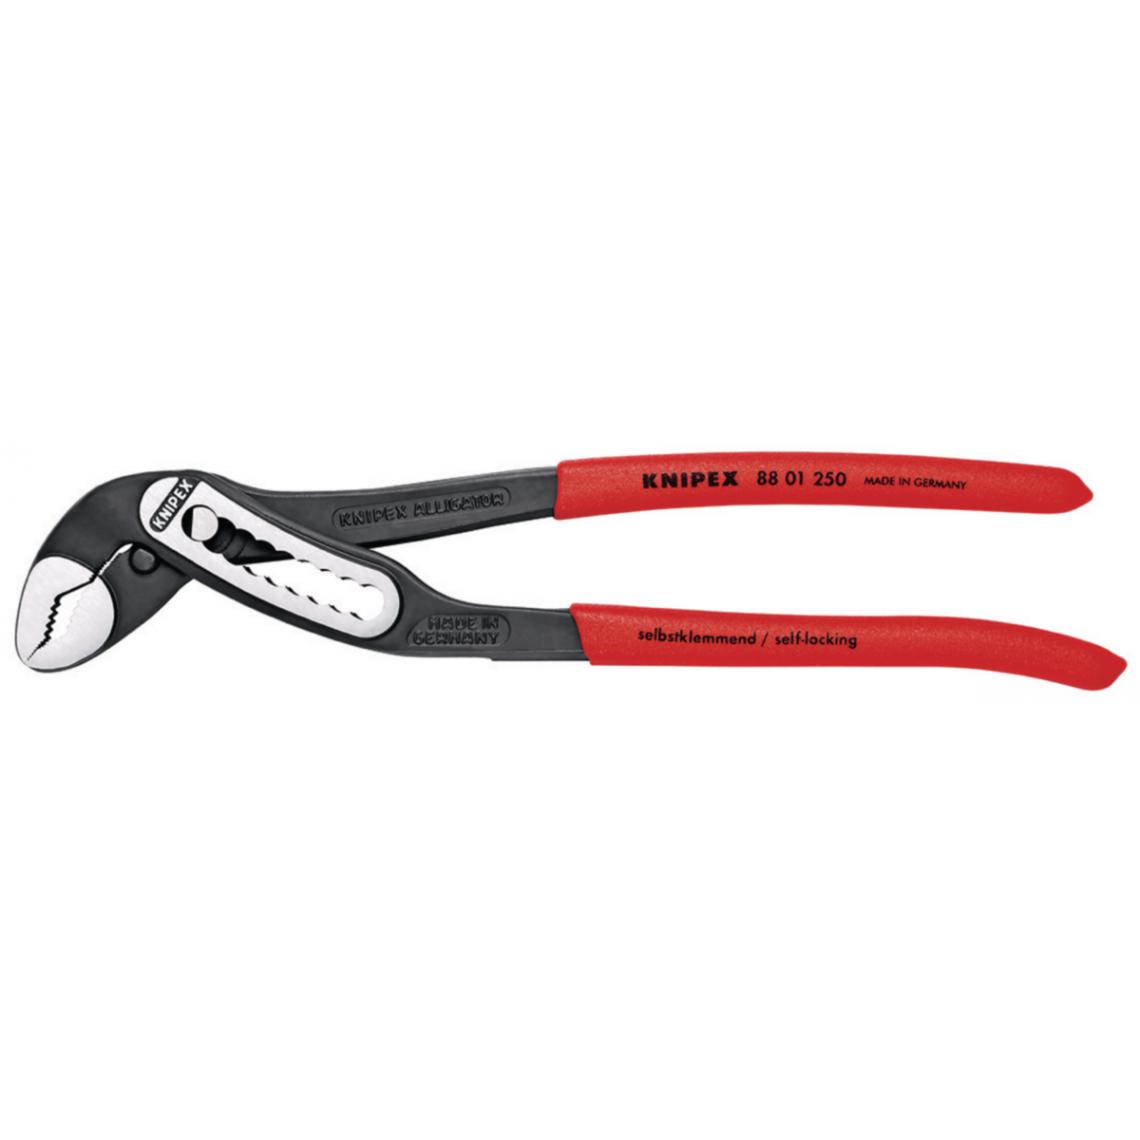 Knipex - pince multiprise - knipex alligator - longueur 250 mm - knipex 88 01 250 - Outils de coupe